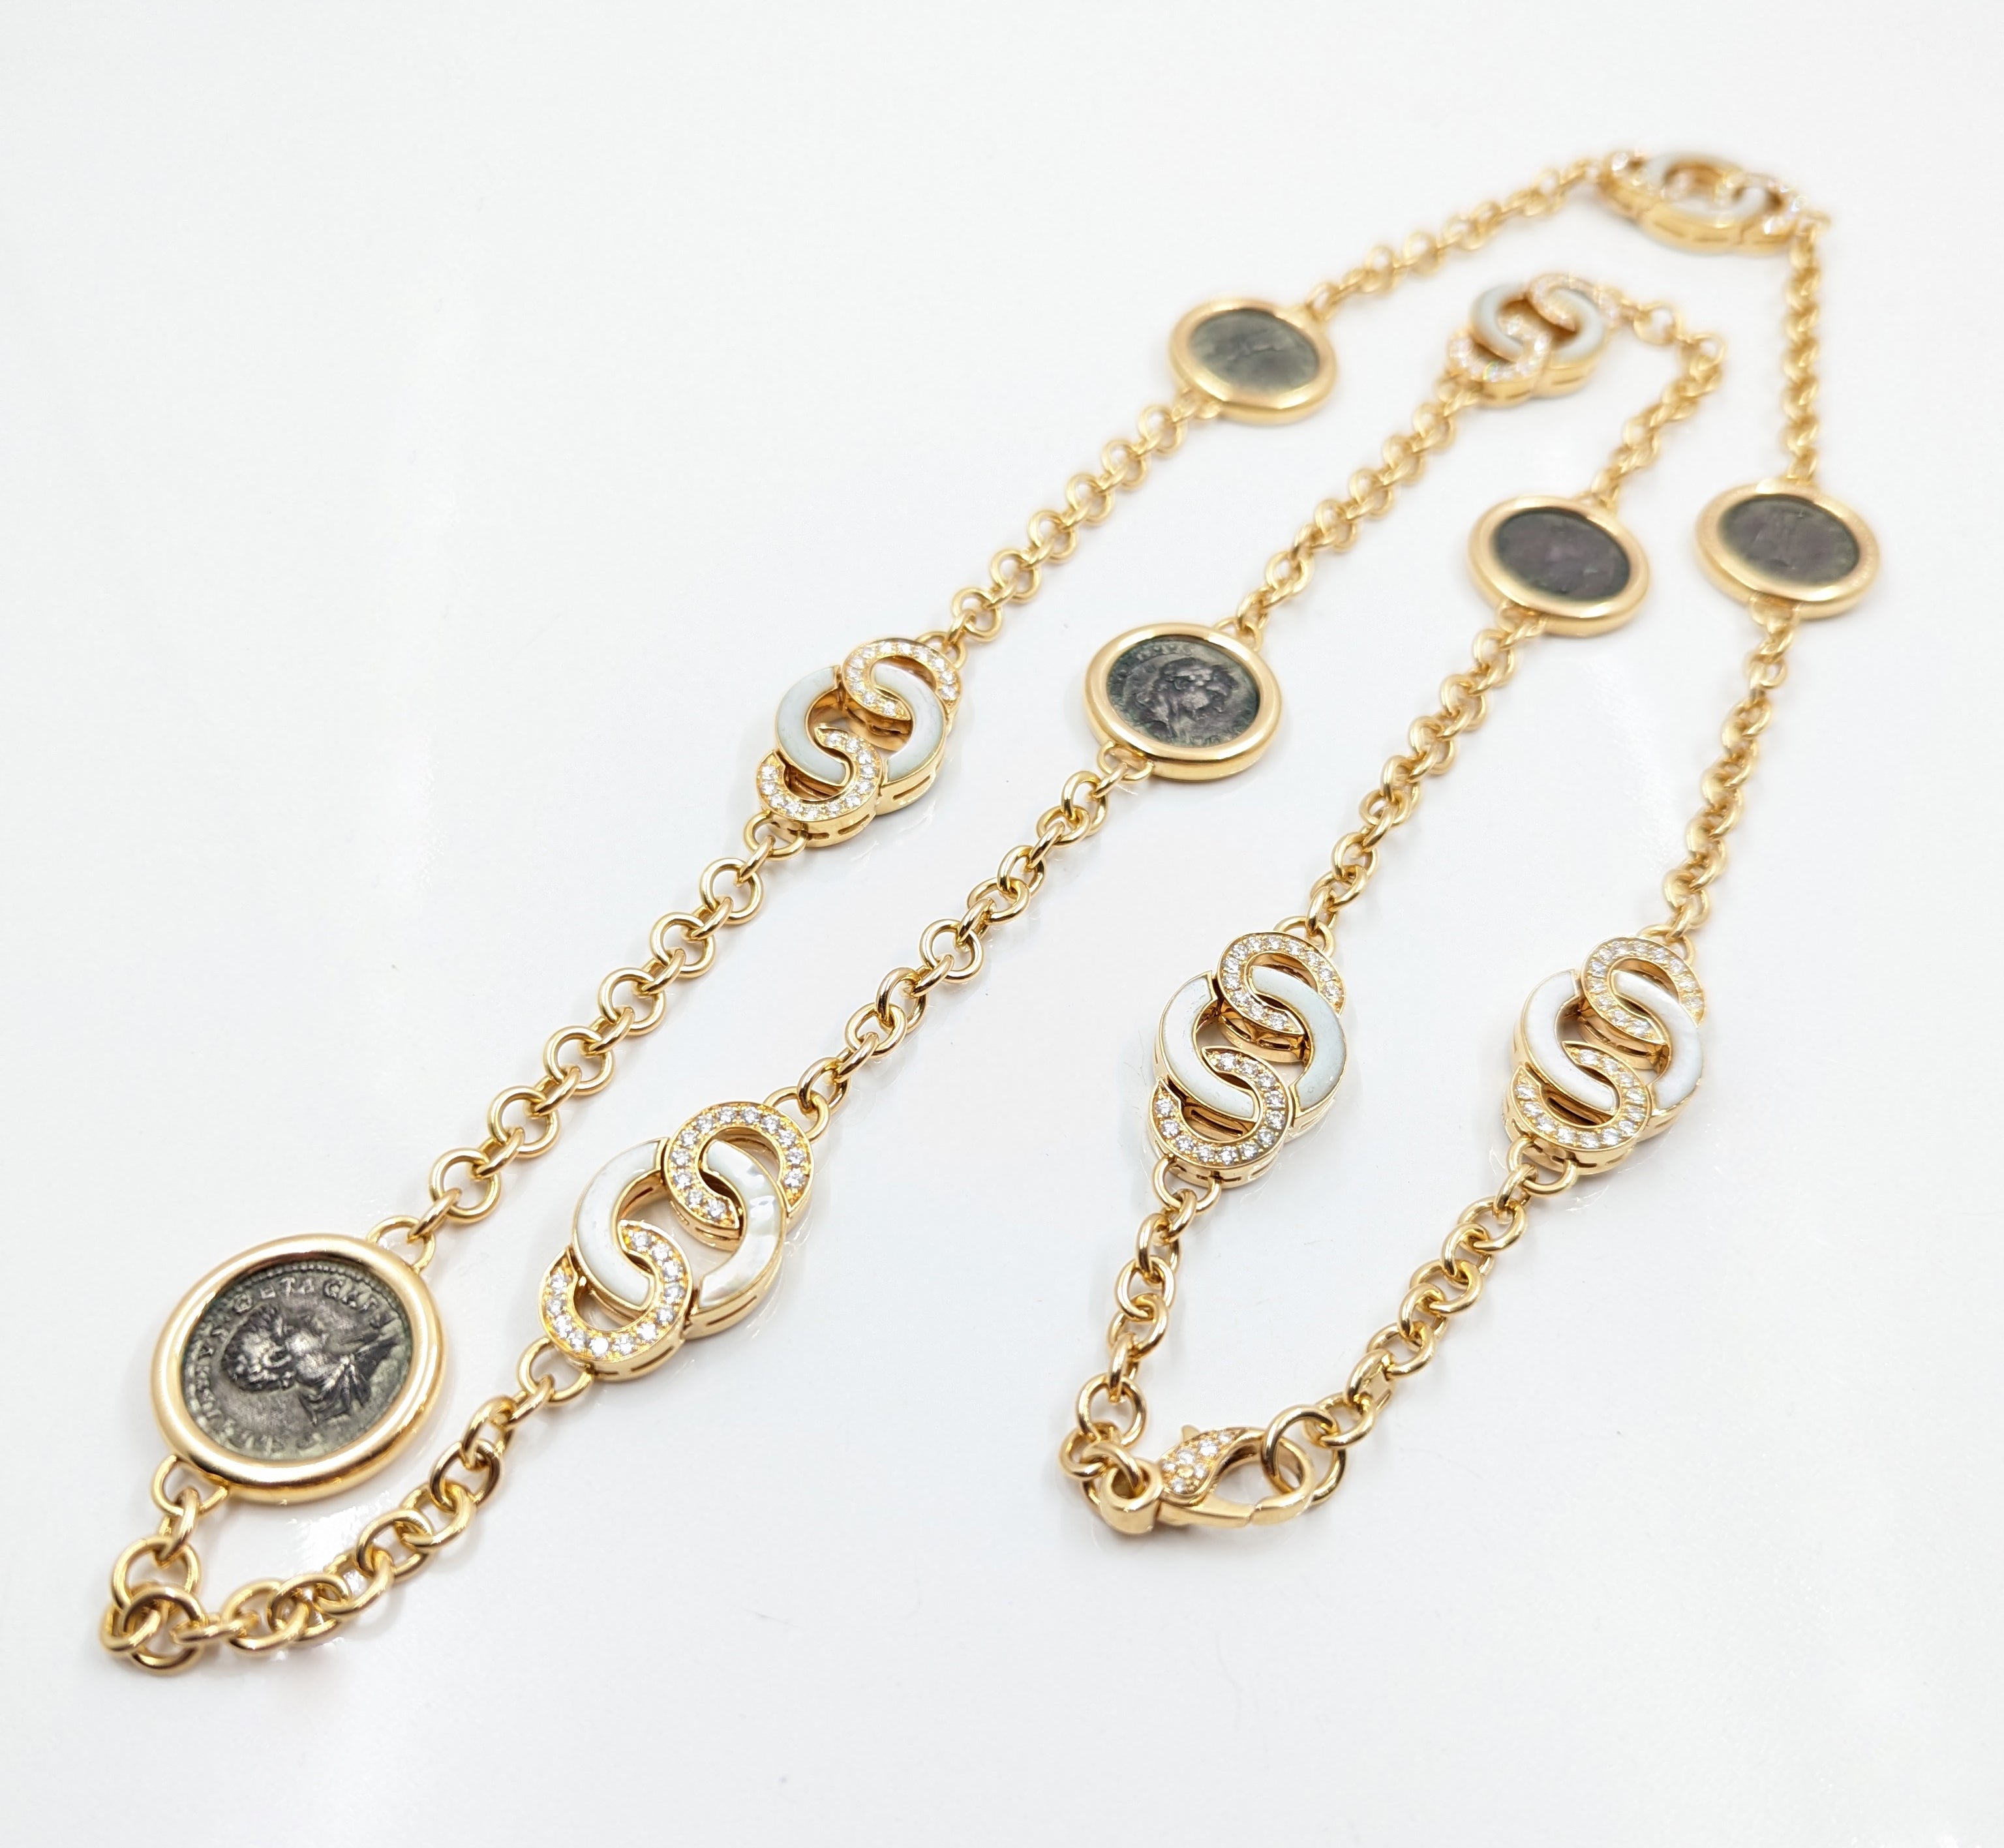 Authentic Bvlgari "Monete" Coin Necklace. 36"(L).Weight: 138 grams.